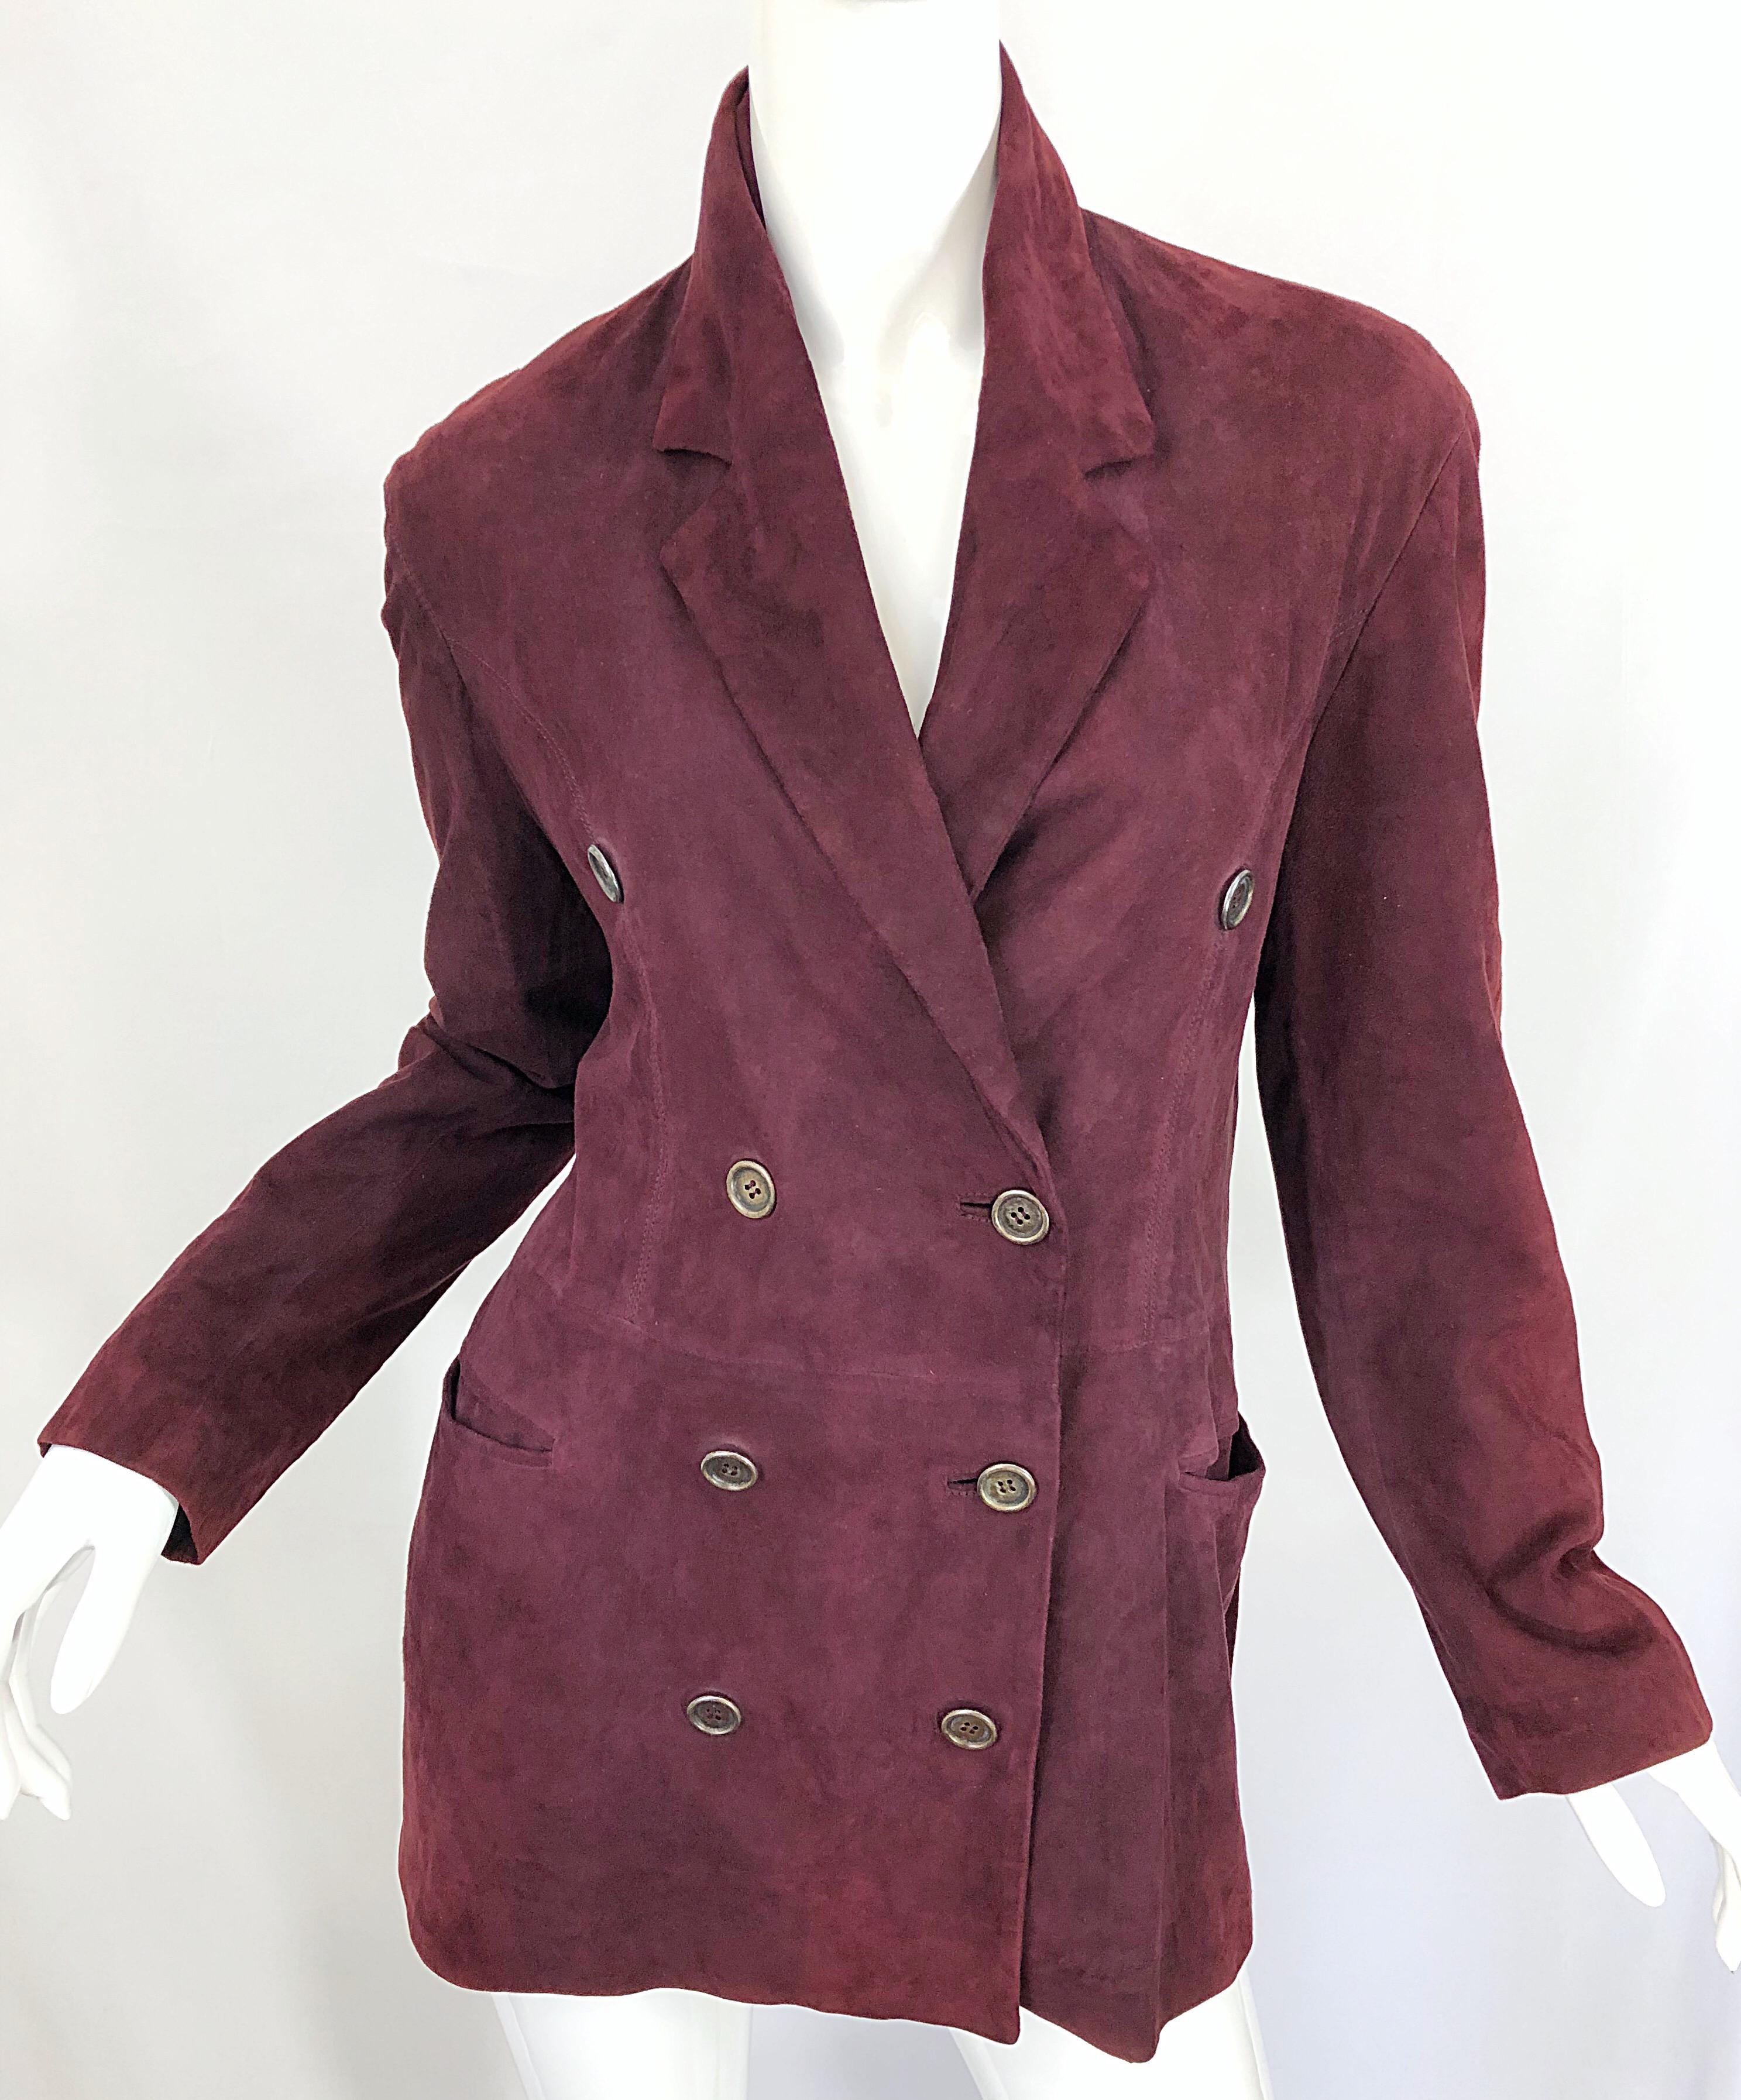 Ozbek 1990s Suede Leather Size 8 Burgundy Maroon Double Breasted Blazer Jacket In Excellent Condition For Sale In San Diego, CA